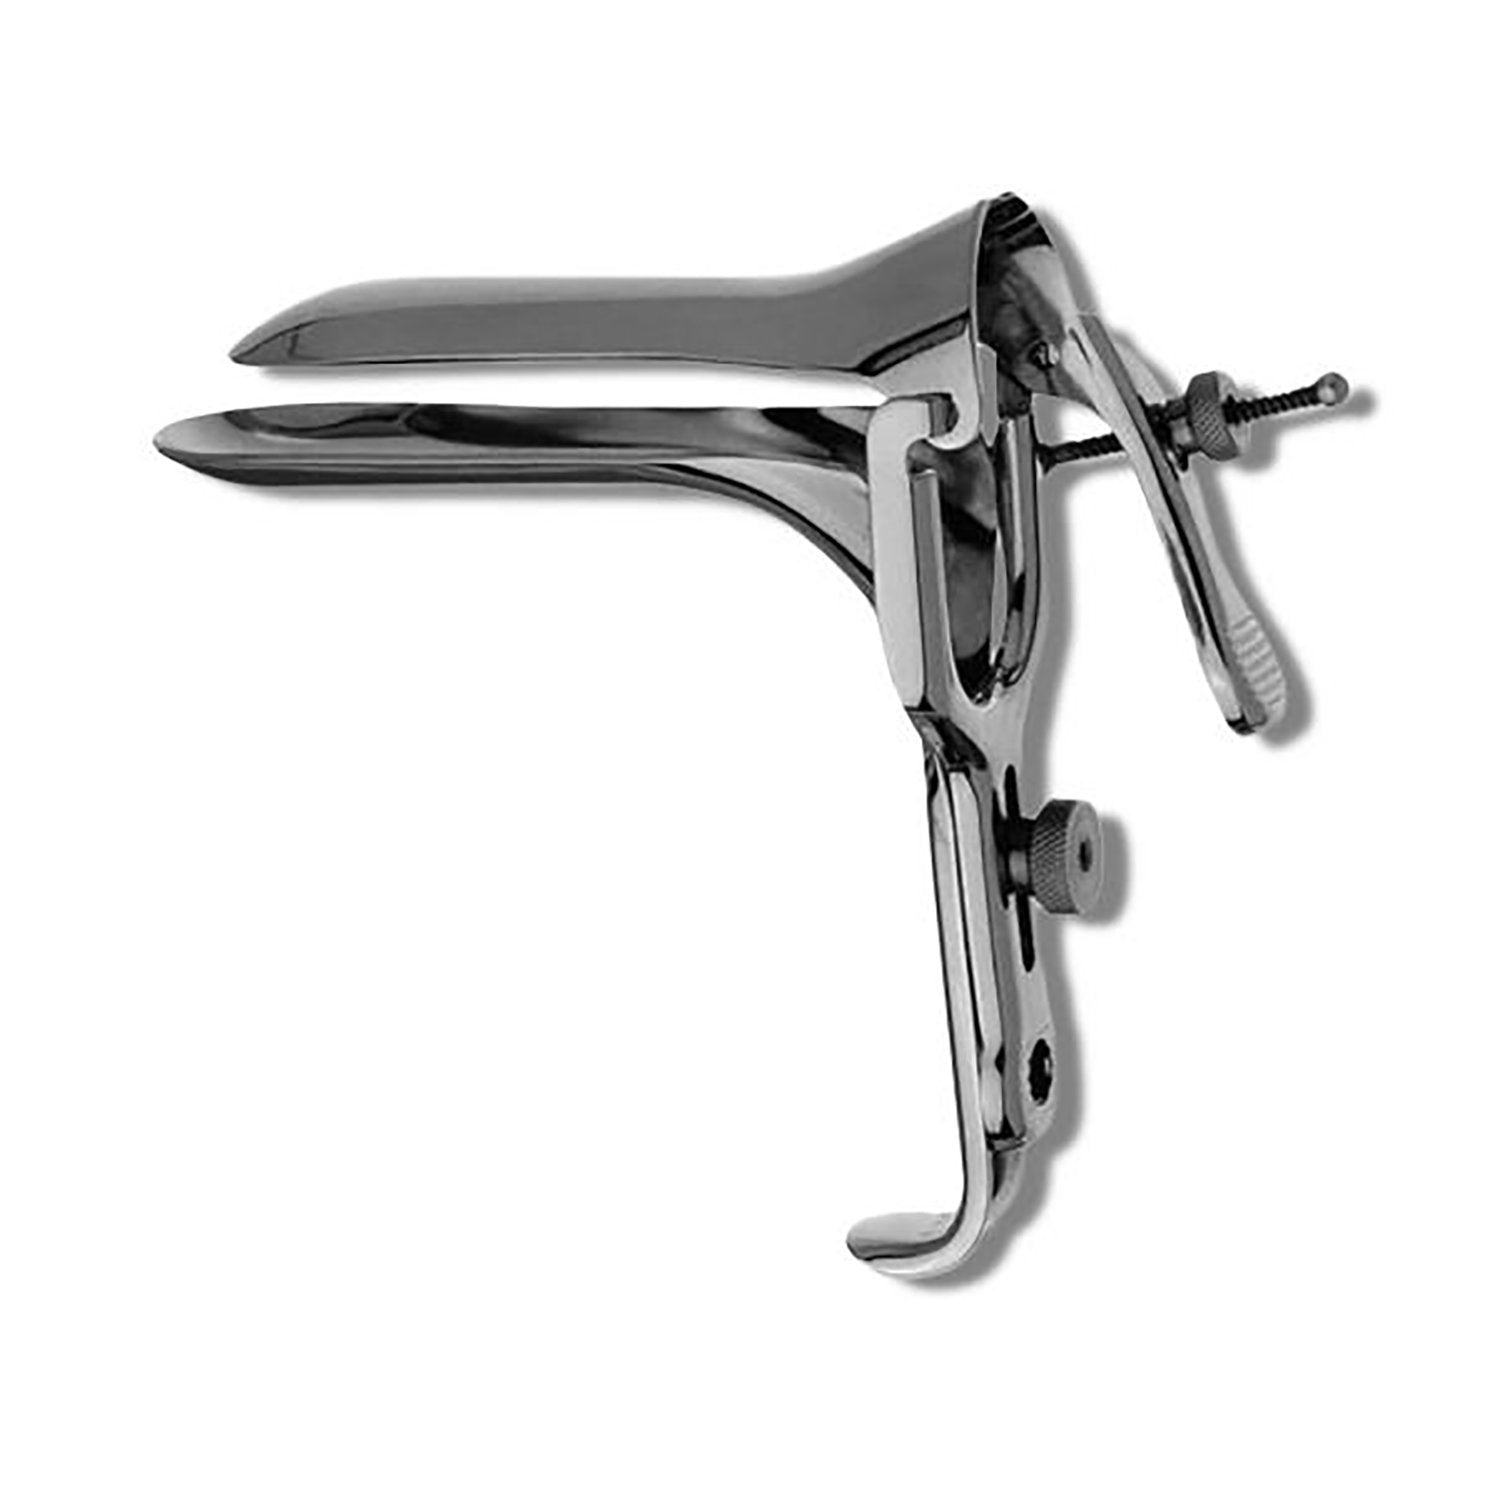 Graves Open Side Vaginal Speculum Gynecology Surgical Instruments Peak Surgicals